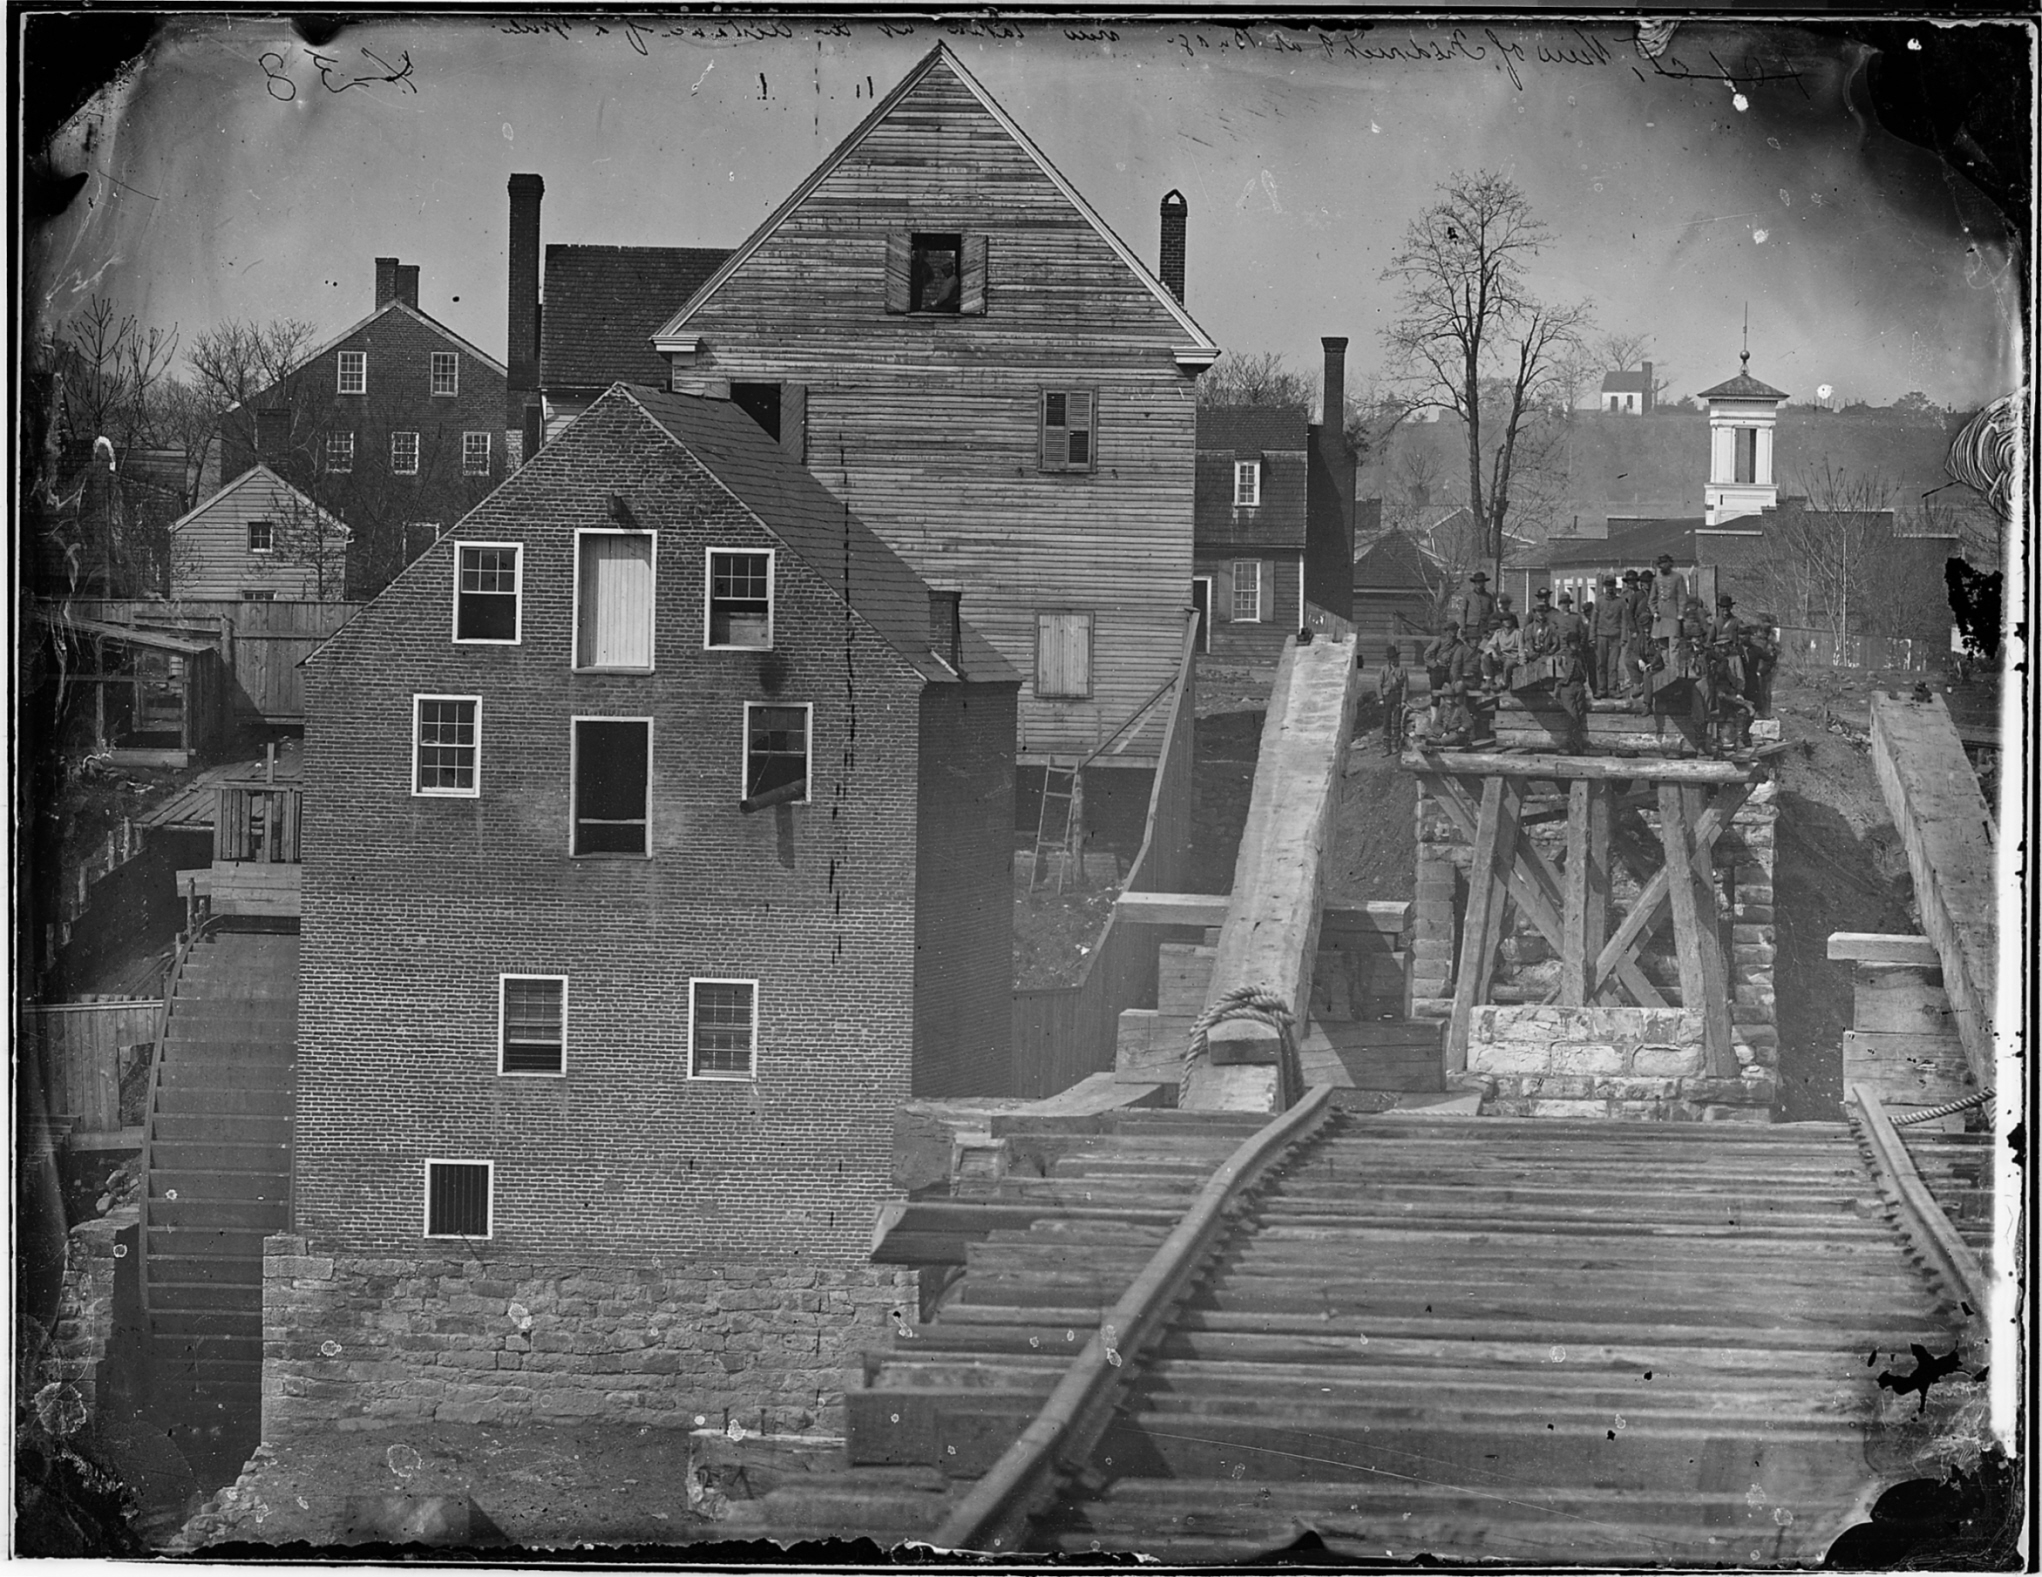 'Fredericksburg from the river. Showing Confederate troops and bridge. (taken at a distance of one mile.)' National Archives; ARC Identifier 524858 Item from Record Group 111: Records of the Office of the Chief Signal Officer, 1860 - 1985